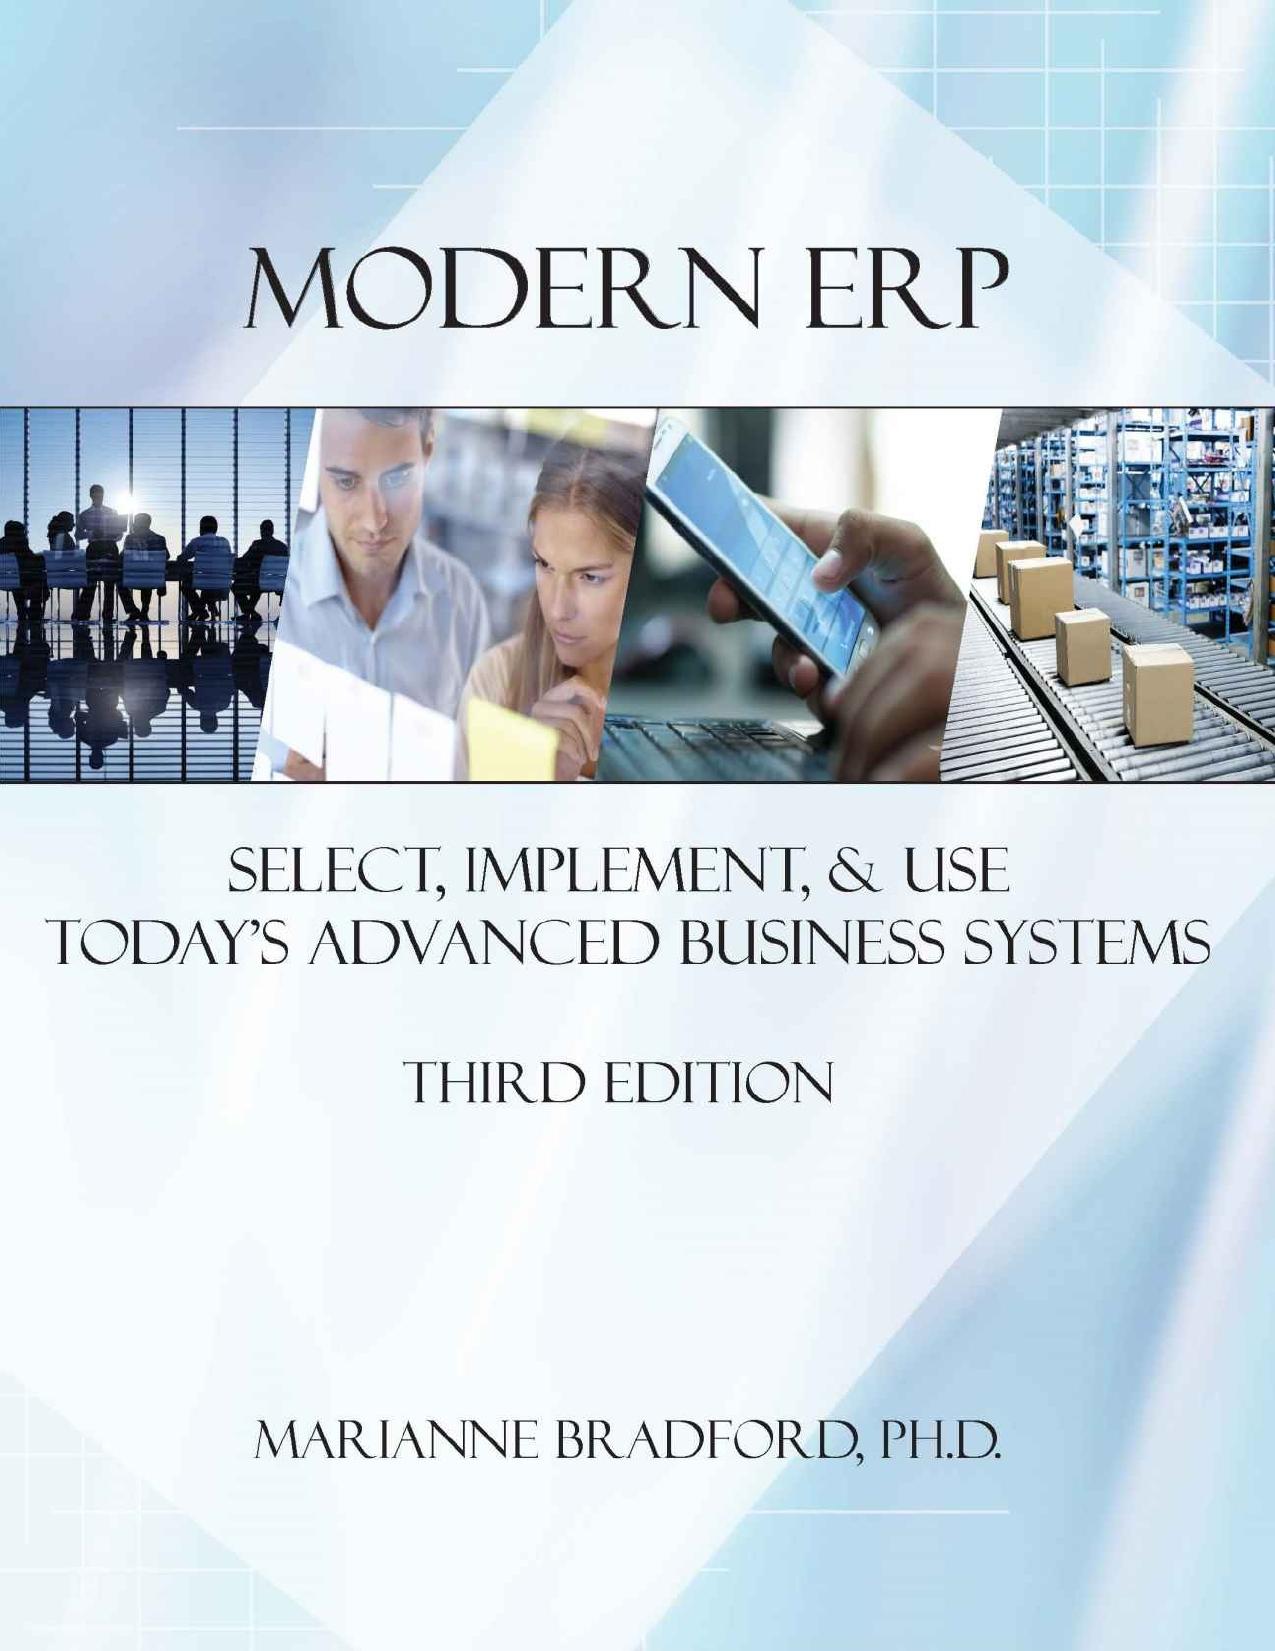 Modern ERP: Select, Implement, & Use Today's Advanced Business Systems 3rd Edition by Marianne Bradford